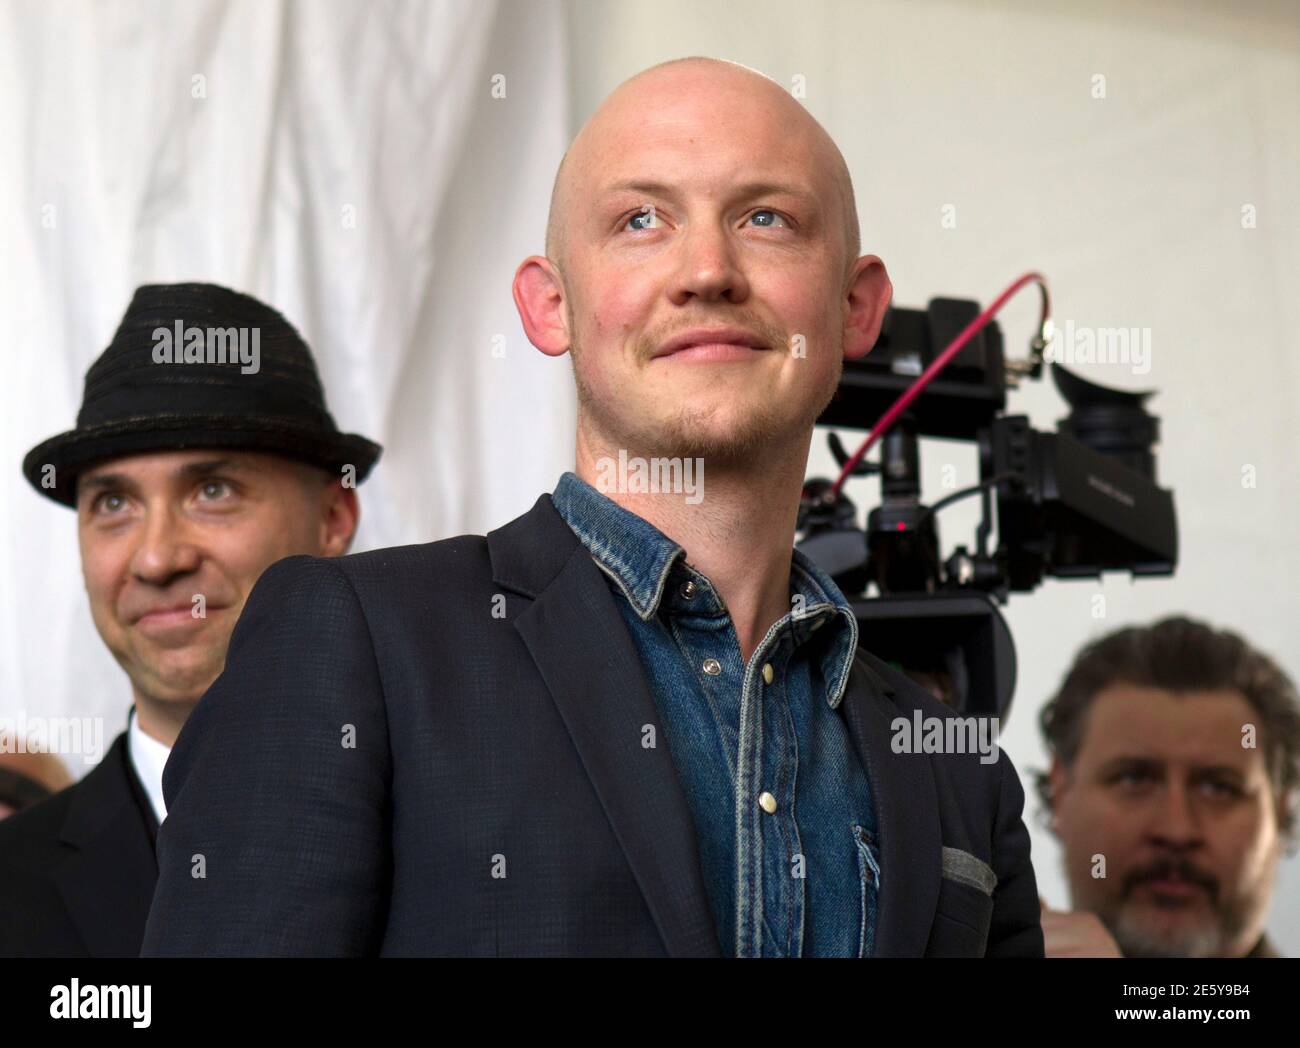 Isaac Slade (C), lead singer of The Fray, attends the grand opening of the Ivanpah Solar Electric Generating System in the Mojave Desert near the California-Nevada border February 13, 2014. The project, a partnership of NRG, BrightSource, Google and Bechtel, is the world's largest solar thermal facility. The Fray made a music video at the facility.  REUTERS/Steve Marcus (UNITED STATES - Tags: ENERGY ENTERTAINMENT BUSINESS SCIENCE TECHNOLOGY) Stock Photo